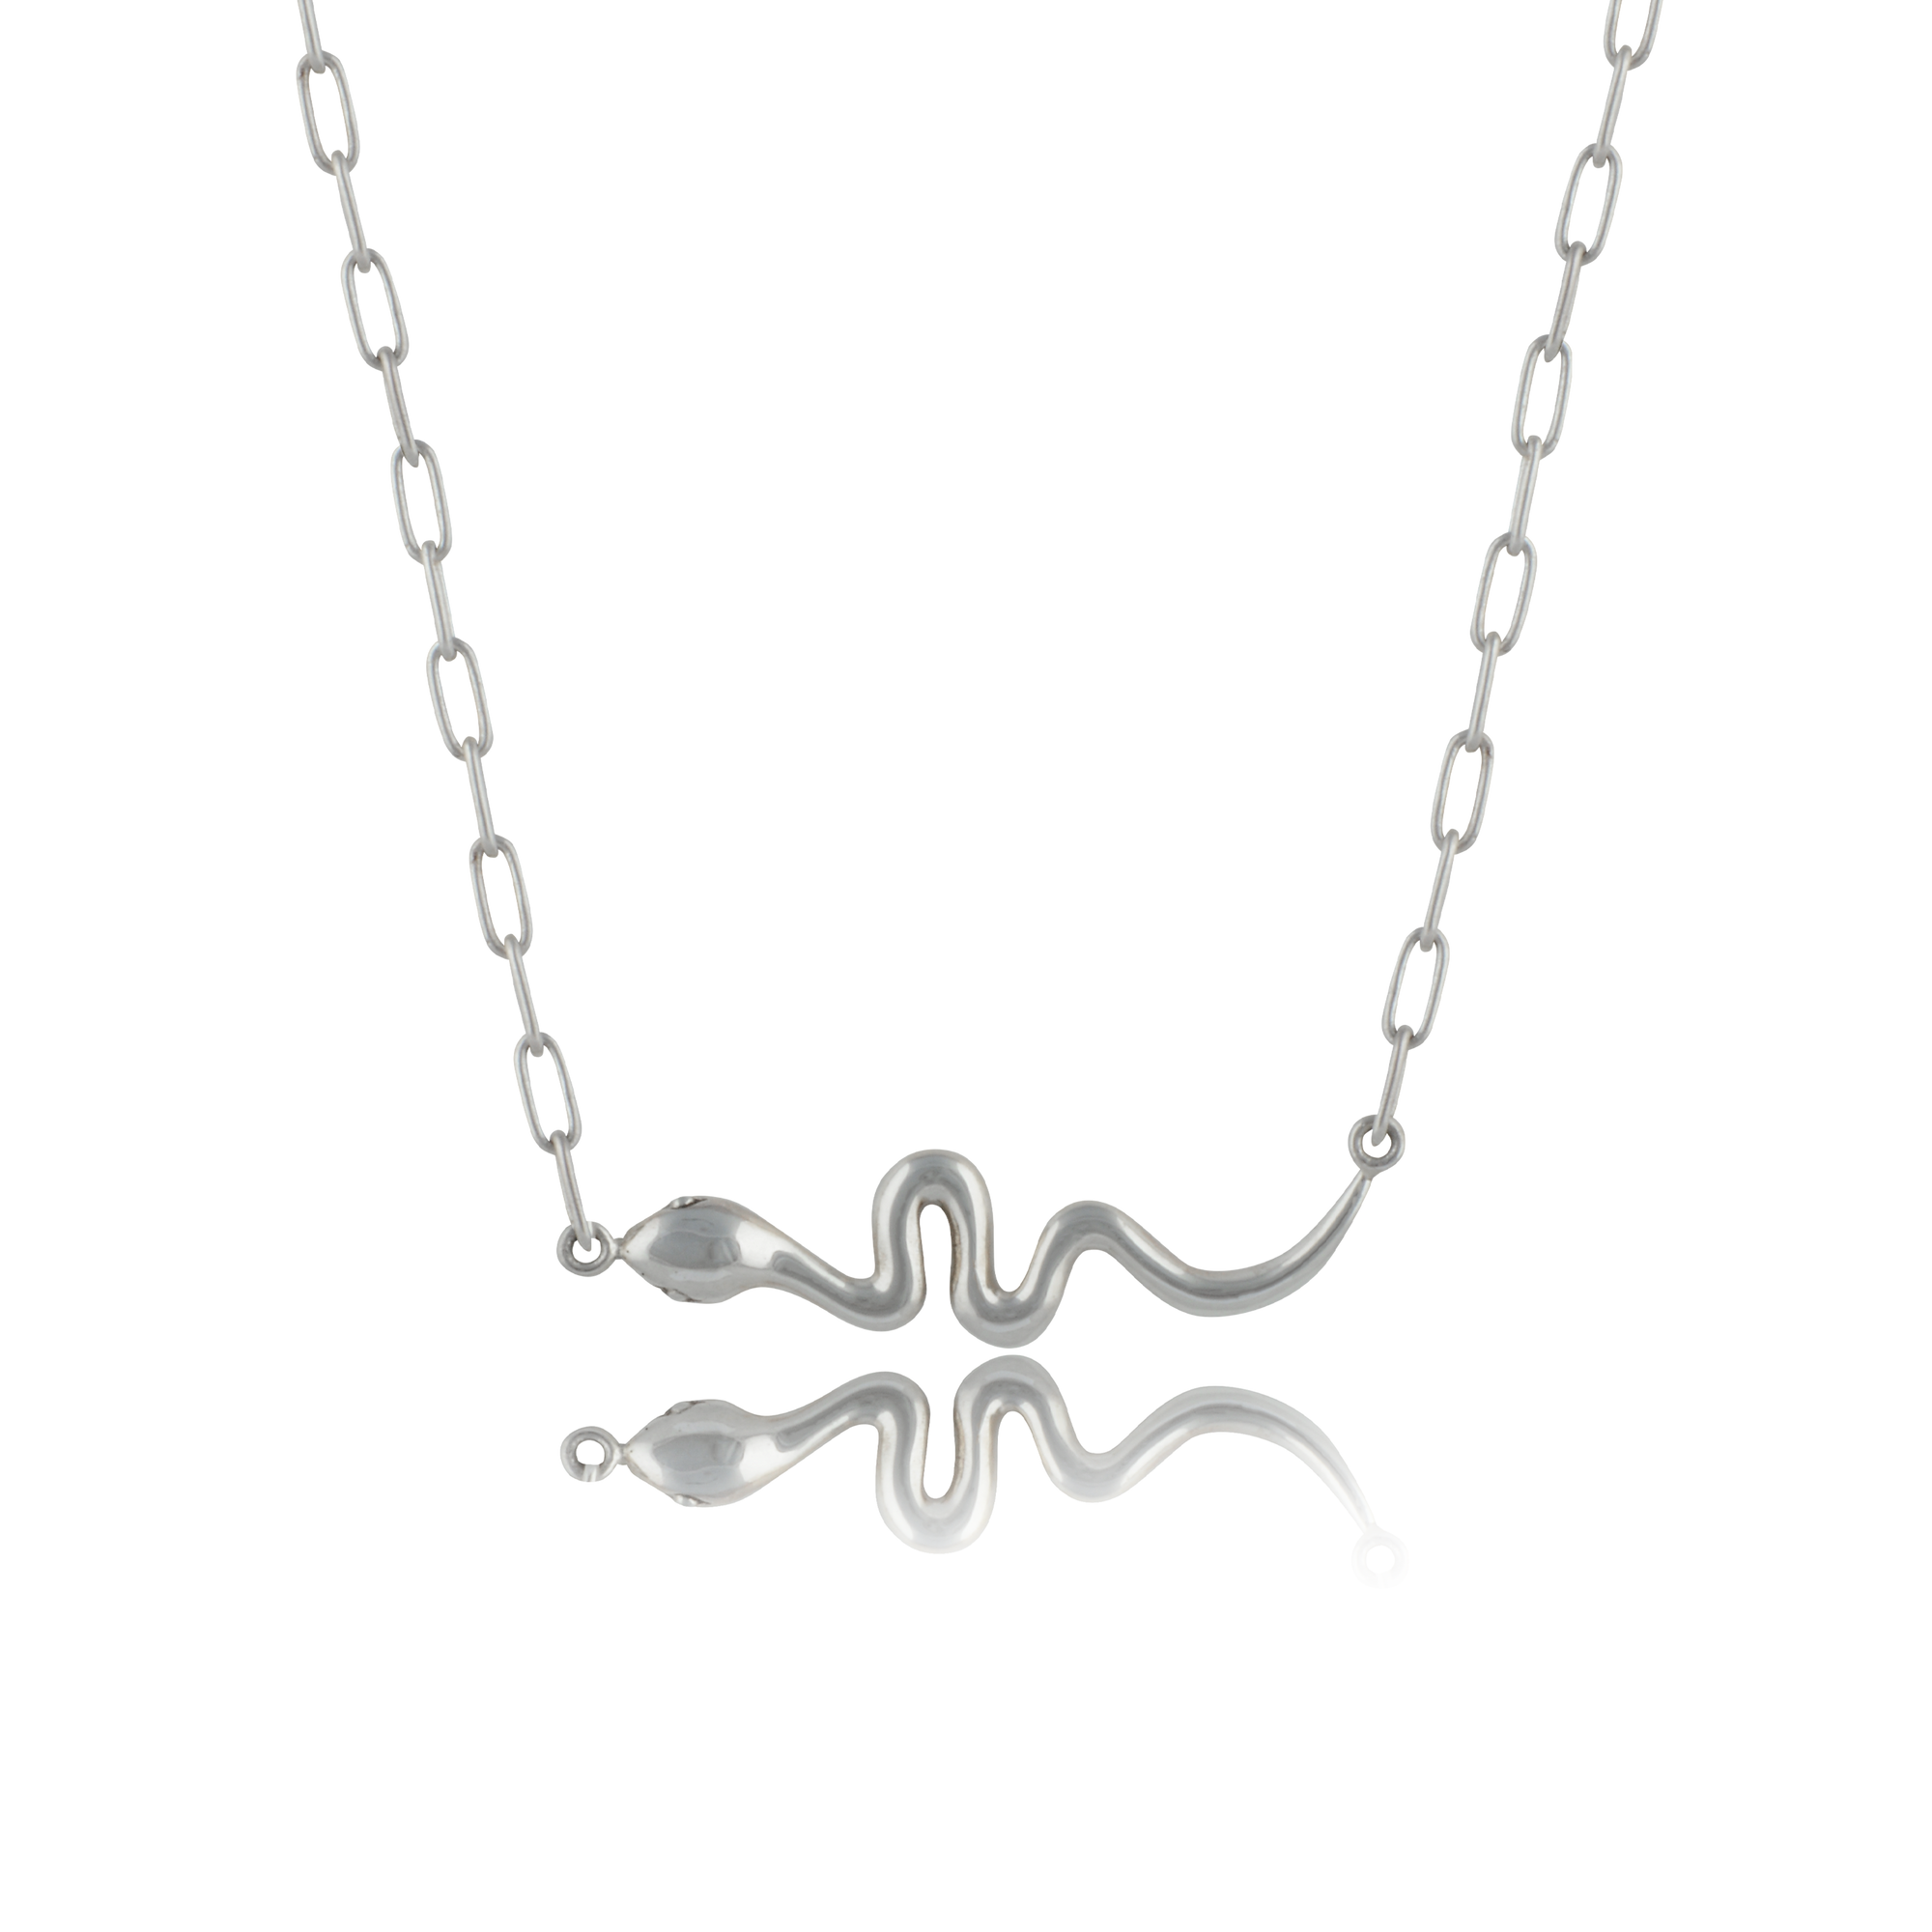 Snake 'Rebirth' Necklace -  Silver Bali jewelry brand's sustainable collection